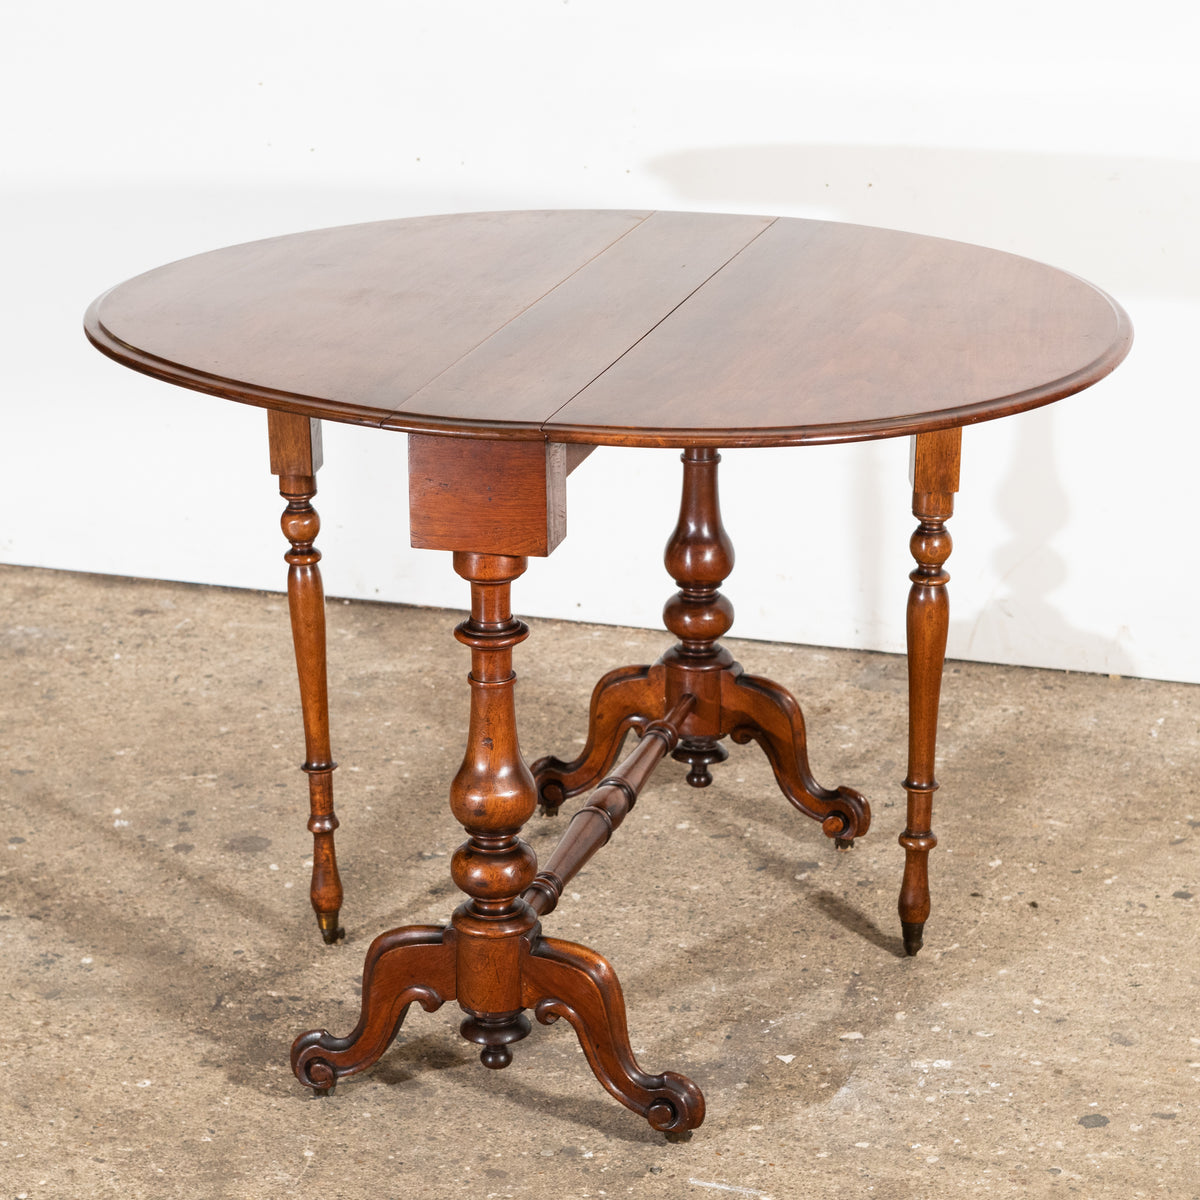 Antique Victorian Mahogany Sutherland Table | Gateleg | Drop Leaf | The Architectural Forum